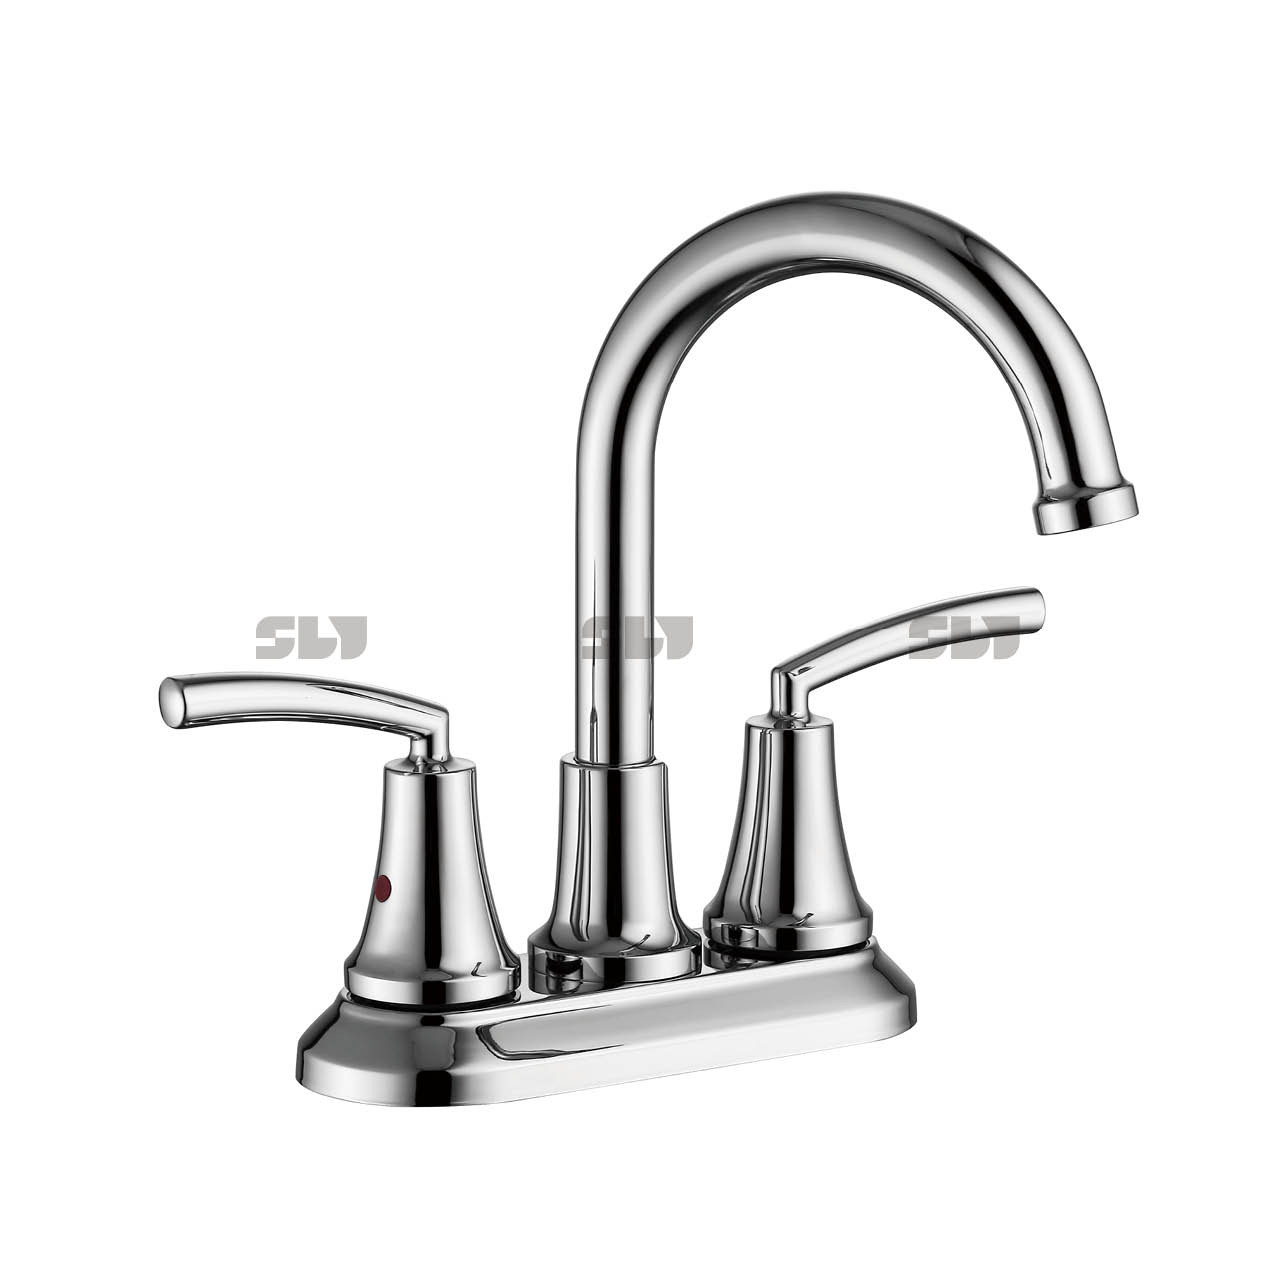 SLY Modern Bathroom Basin Faucets With Dual Handle Chrome 4 Inch Water Mixer Tap